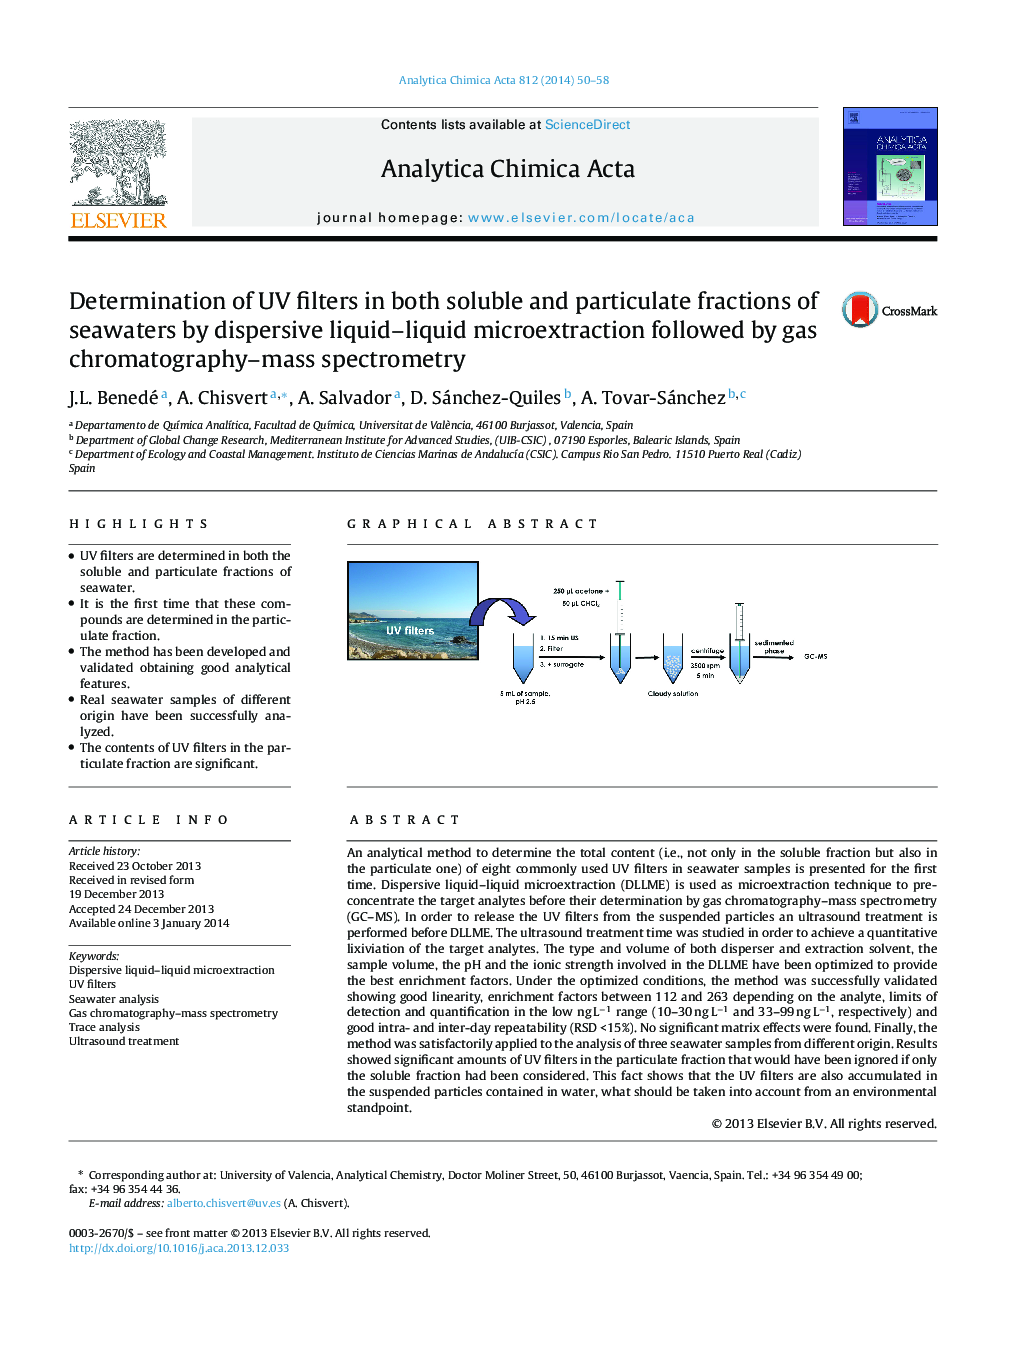 Determination of UV filters in both soluble and particulate fractions of seawaters by dispersive liquid–liquid microextraction followed by gas chromatography–mass spectrometry